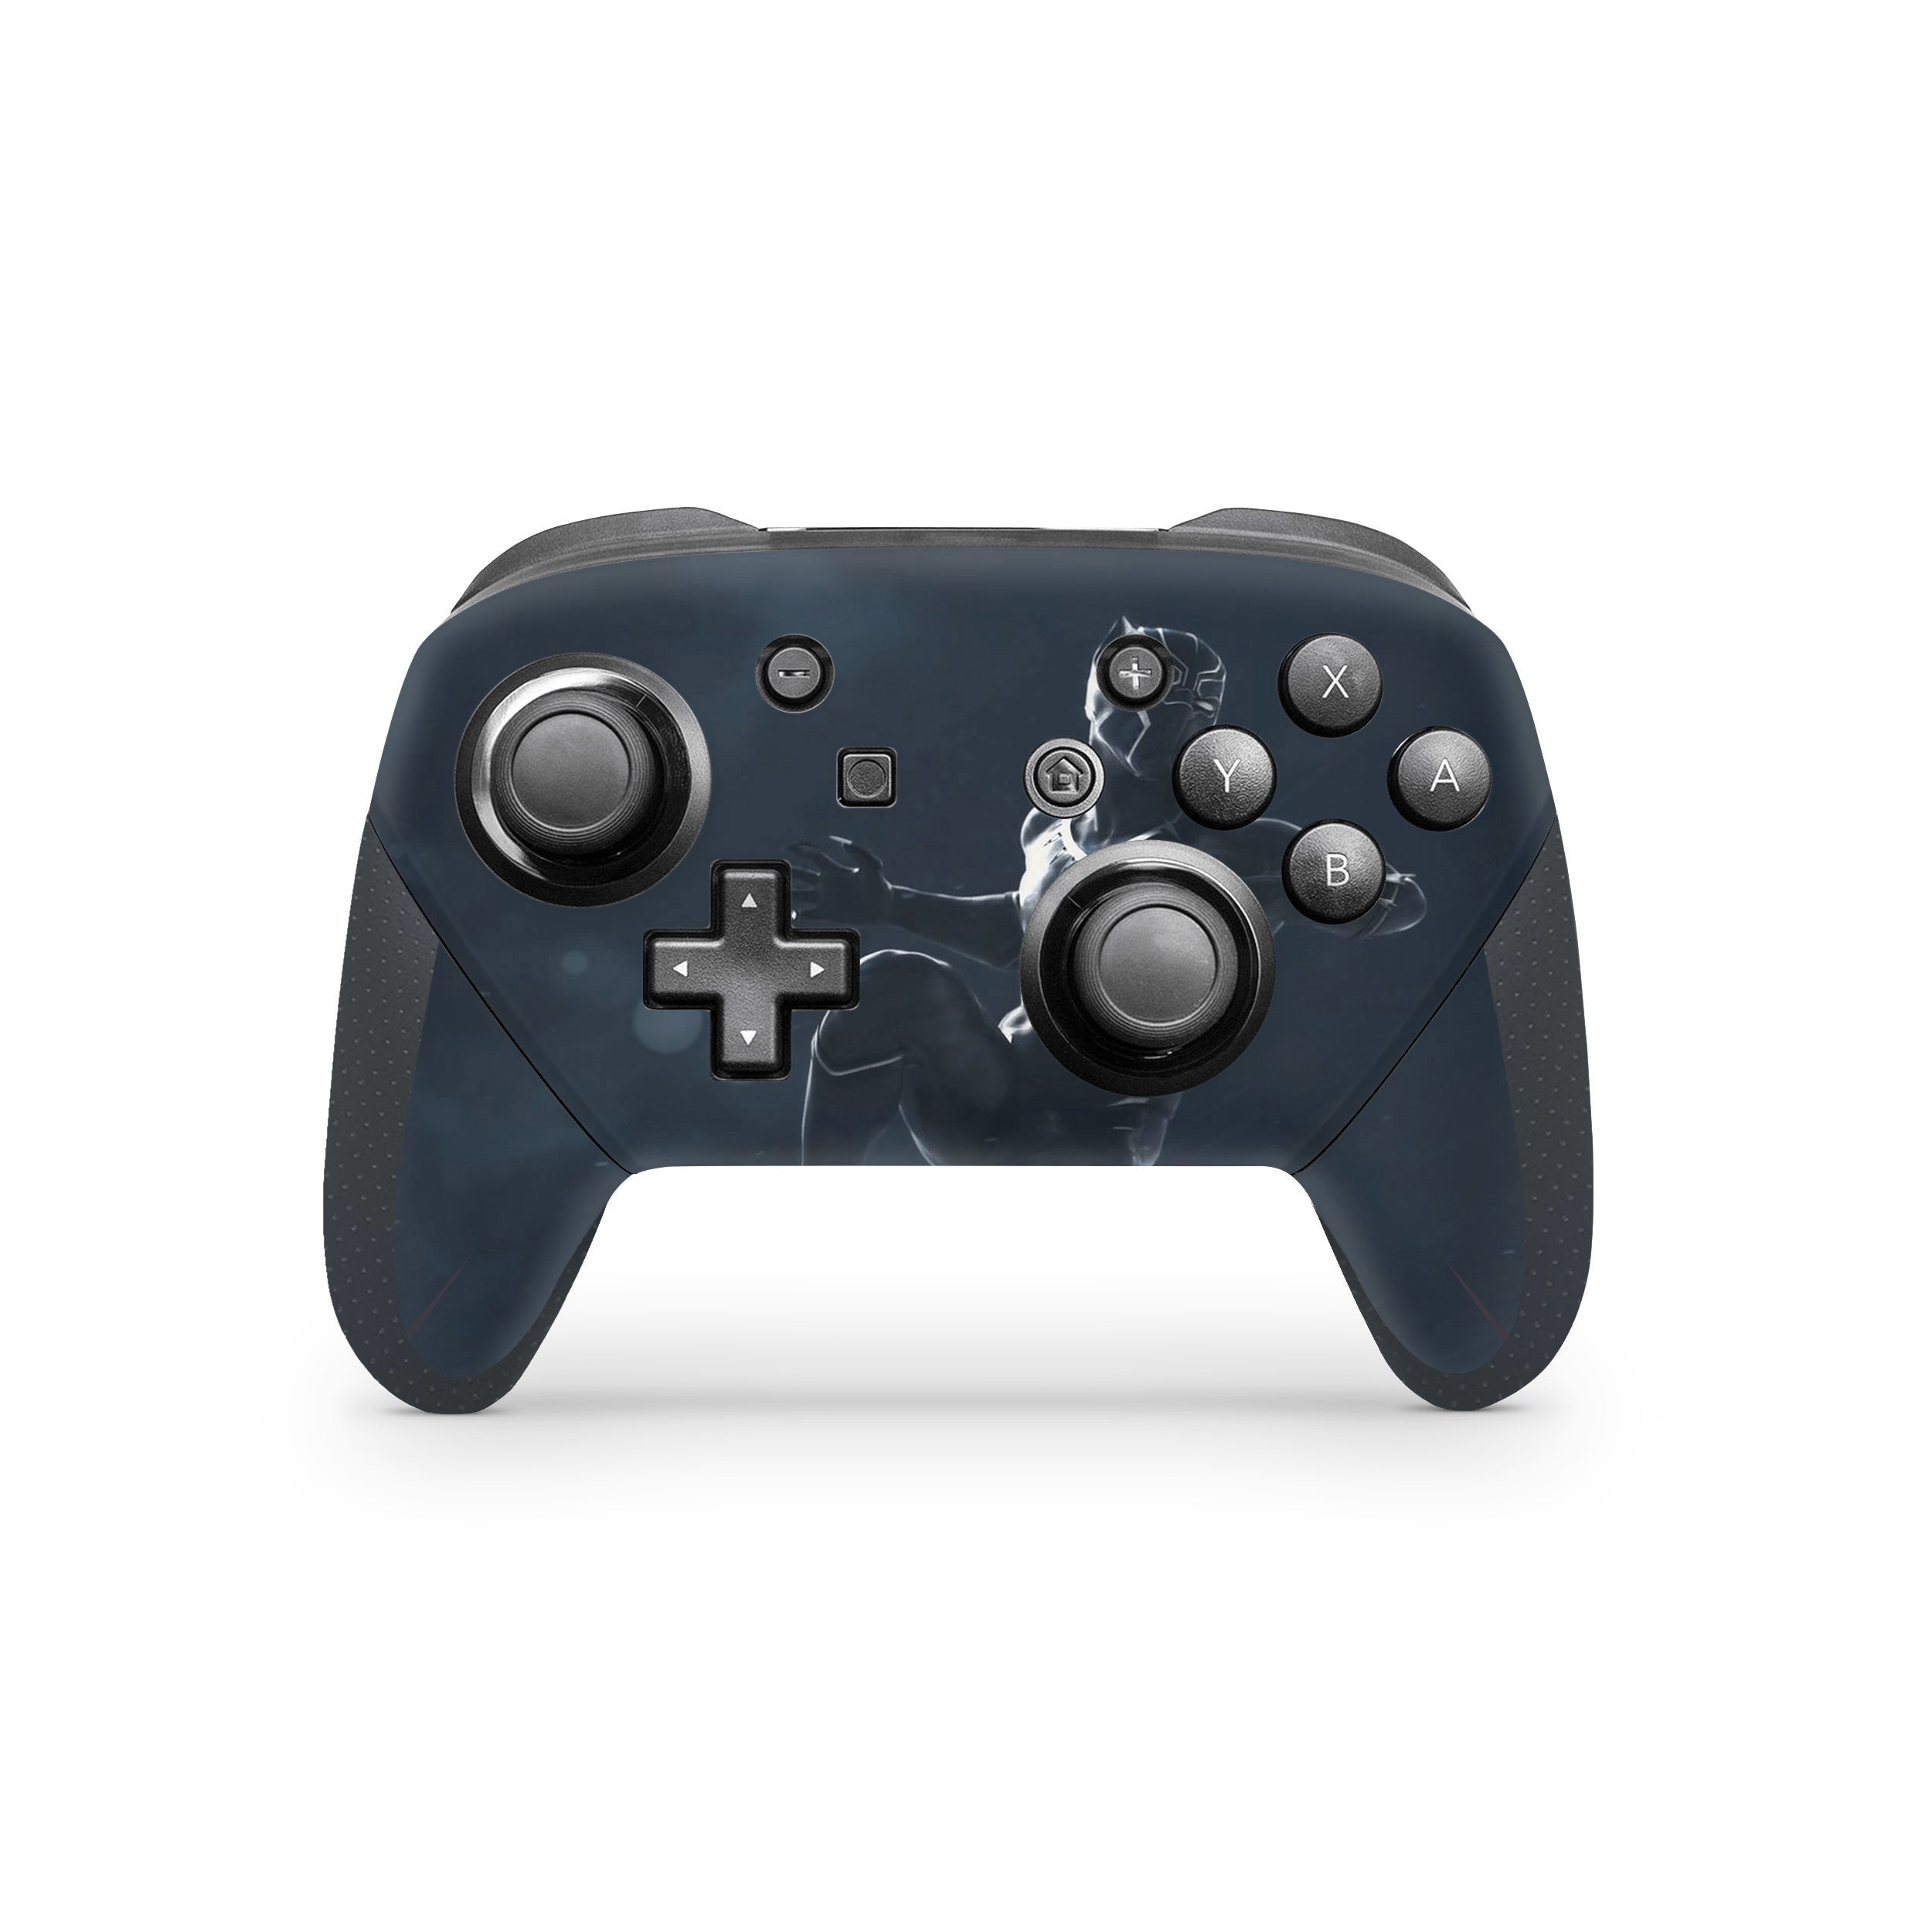 A video game skin featuring a Marvel Black Panther design for the Switch Pro Controller.